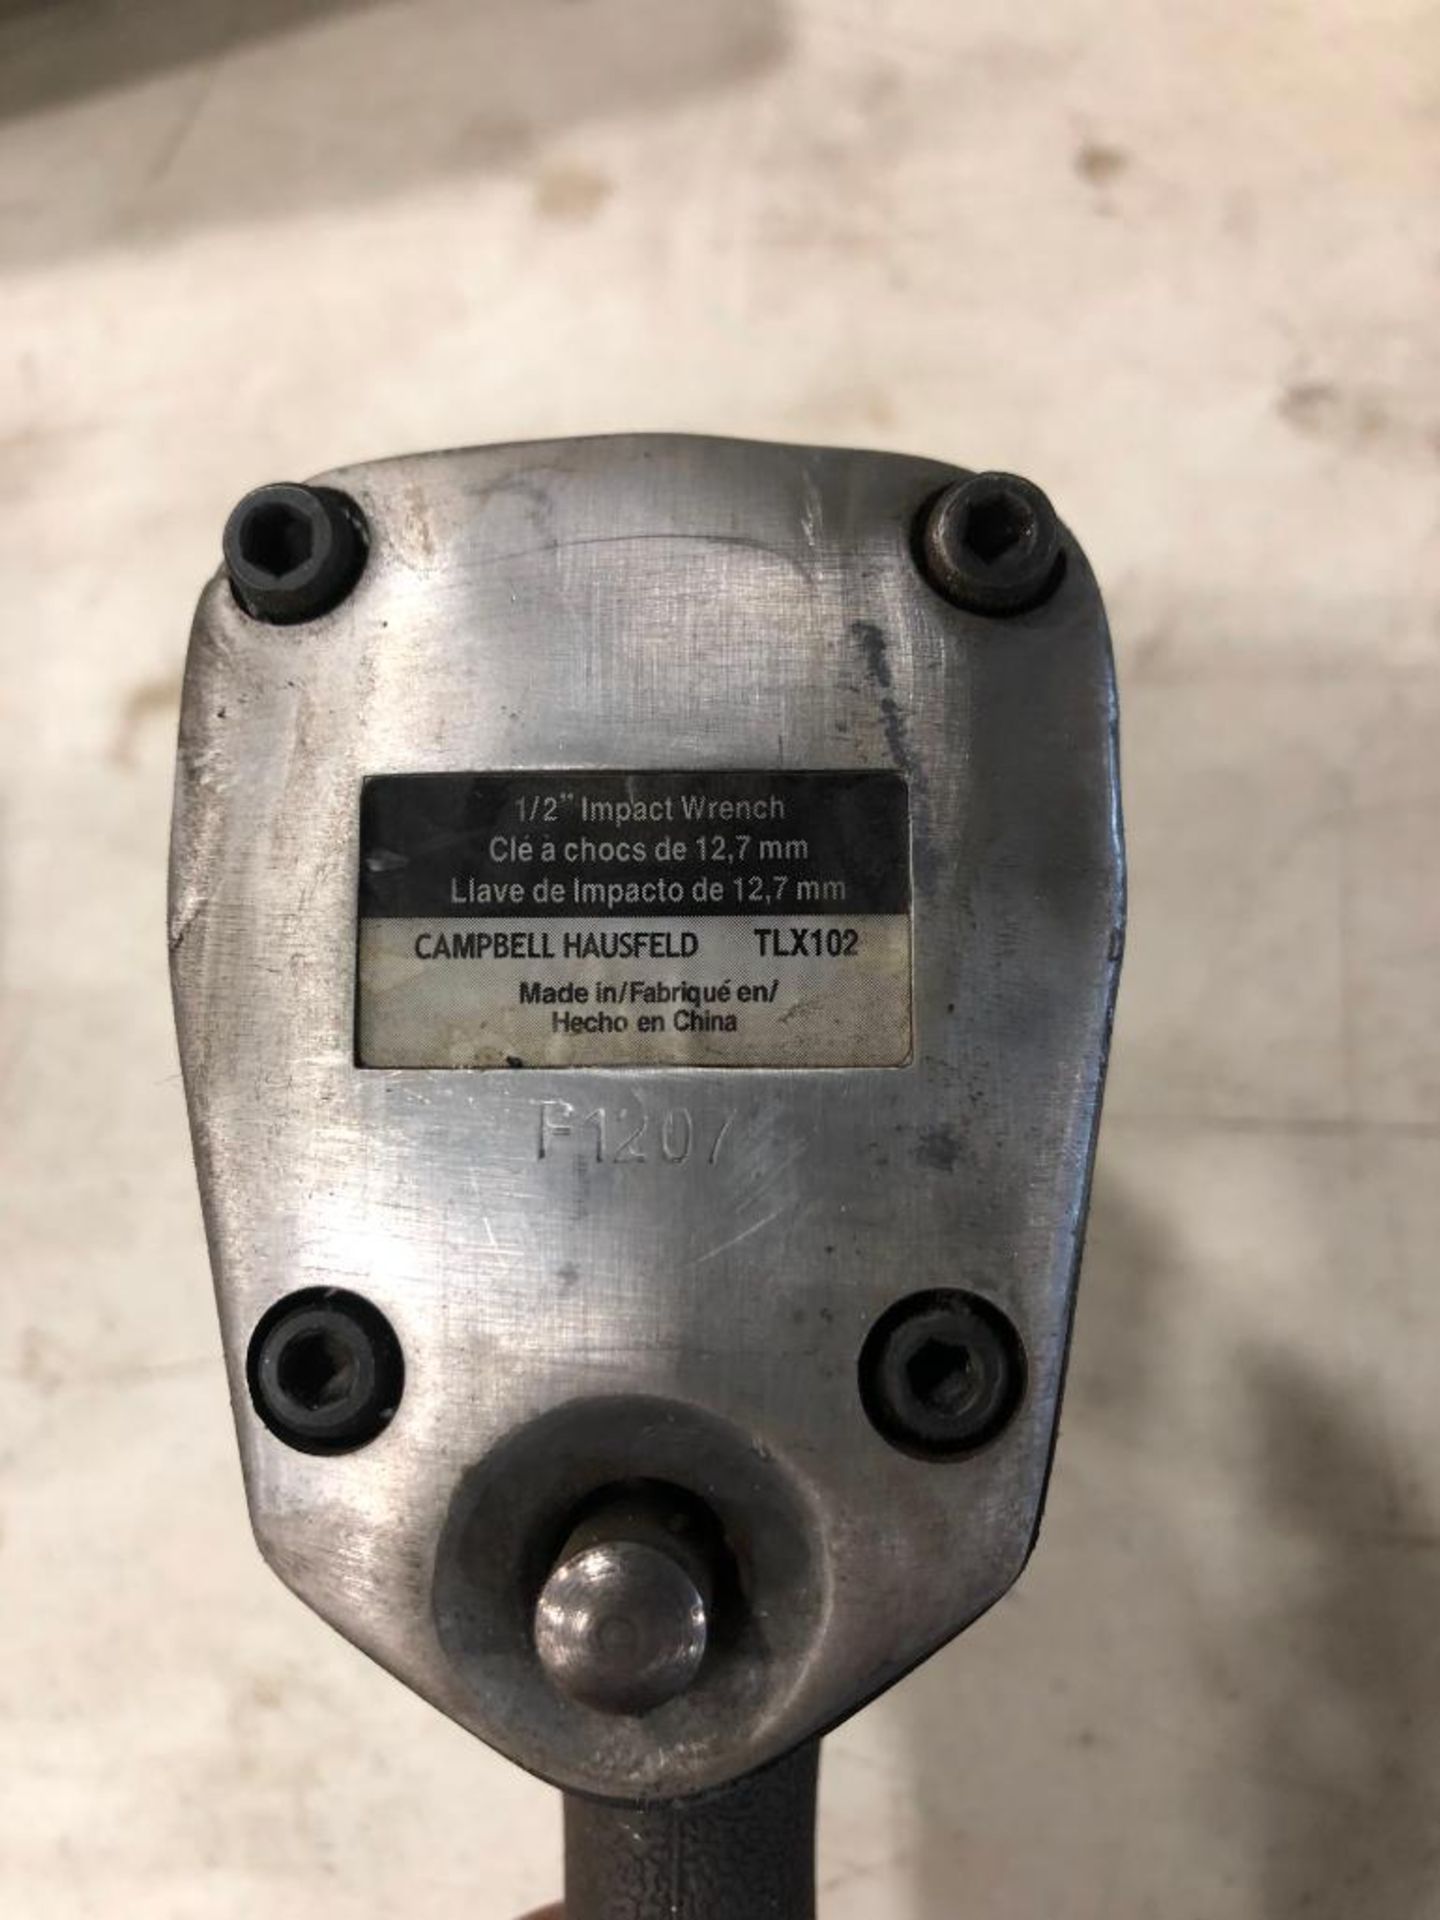 Campbell Hausfeld 1/2" Impact Wrench - Image 2 of 2